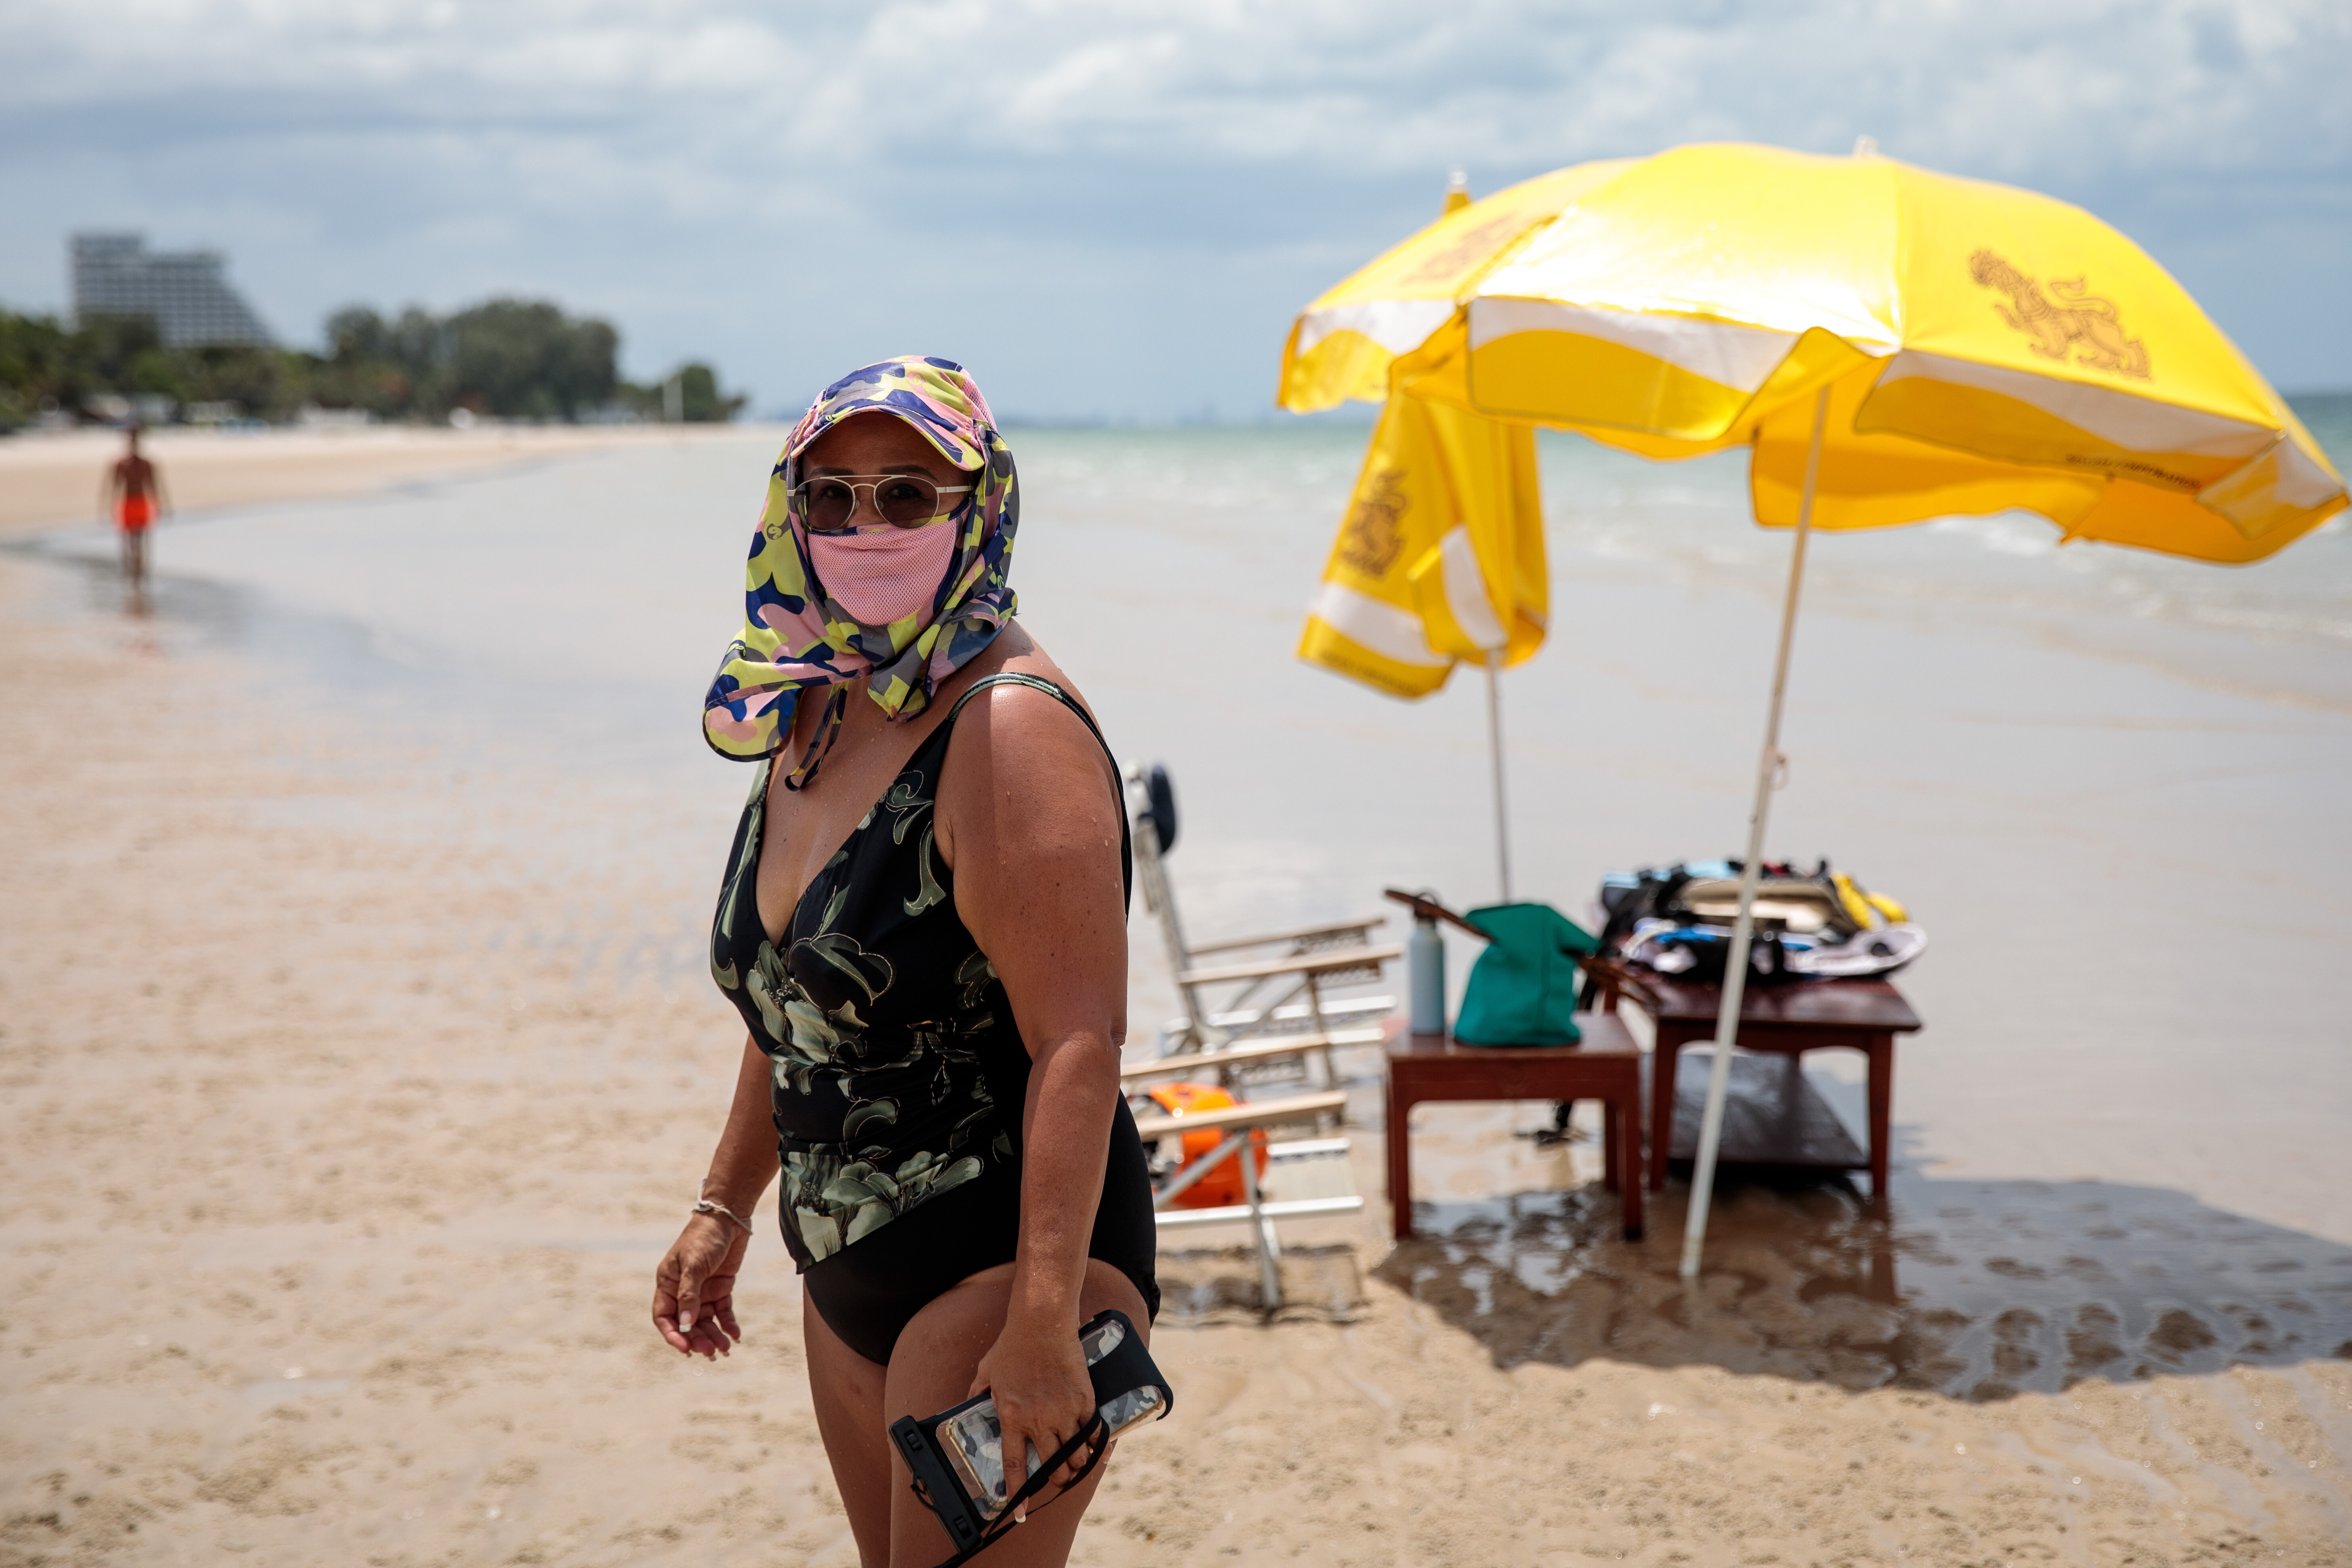 Thailand is planning health measures to reassure visitors when tourism restarts. Photo: Jack Taylor/AFP via Getty Images